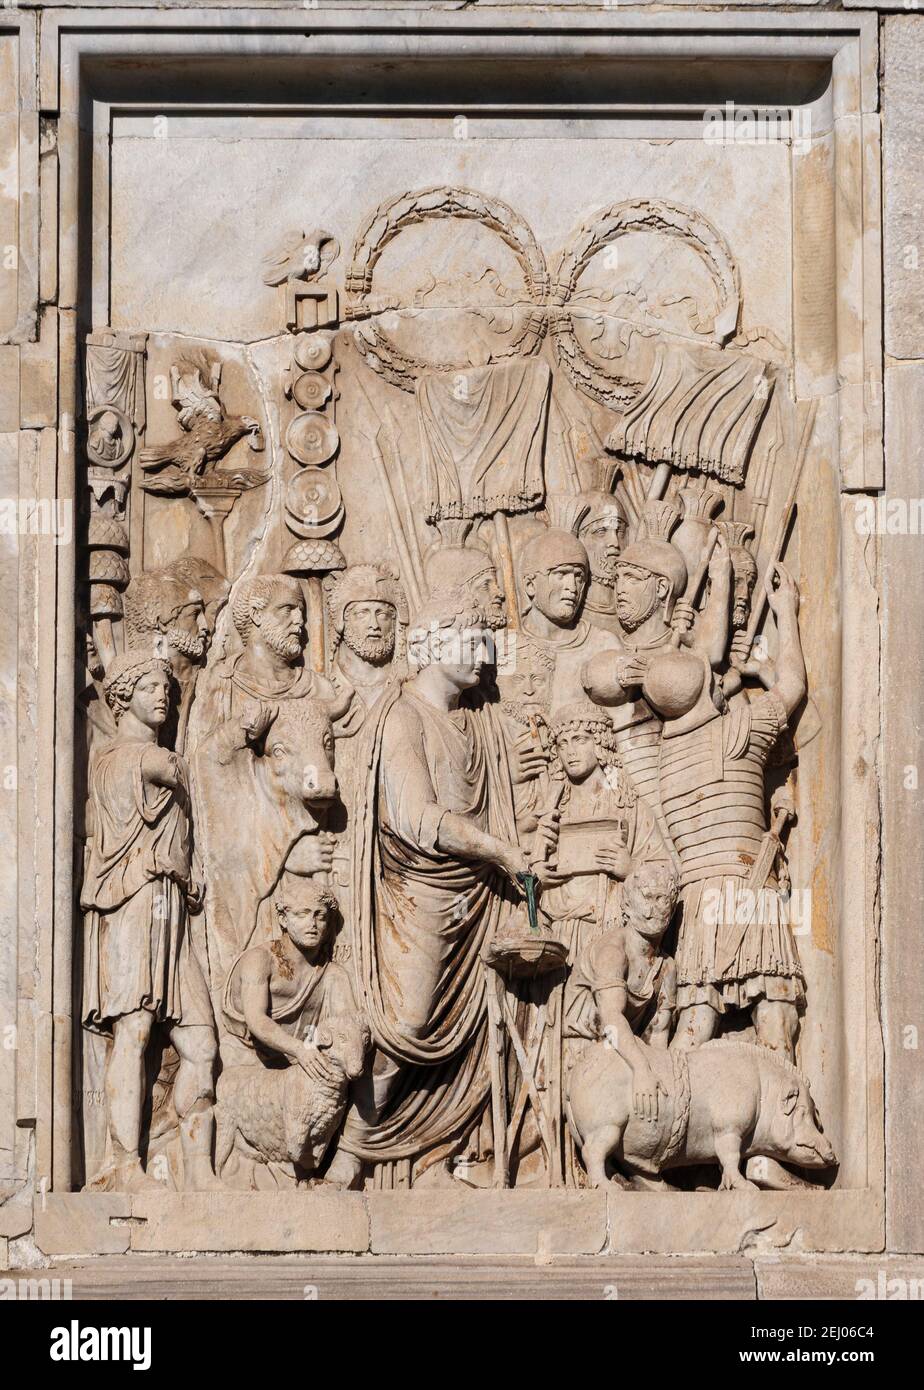 Rome. Italy. Arch of Constantine (Arco di Costantino), detail of sculptural relief depicting Roman emperor Marcus Aurelius (head replaced with that of Stock Photo